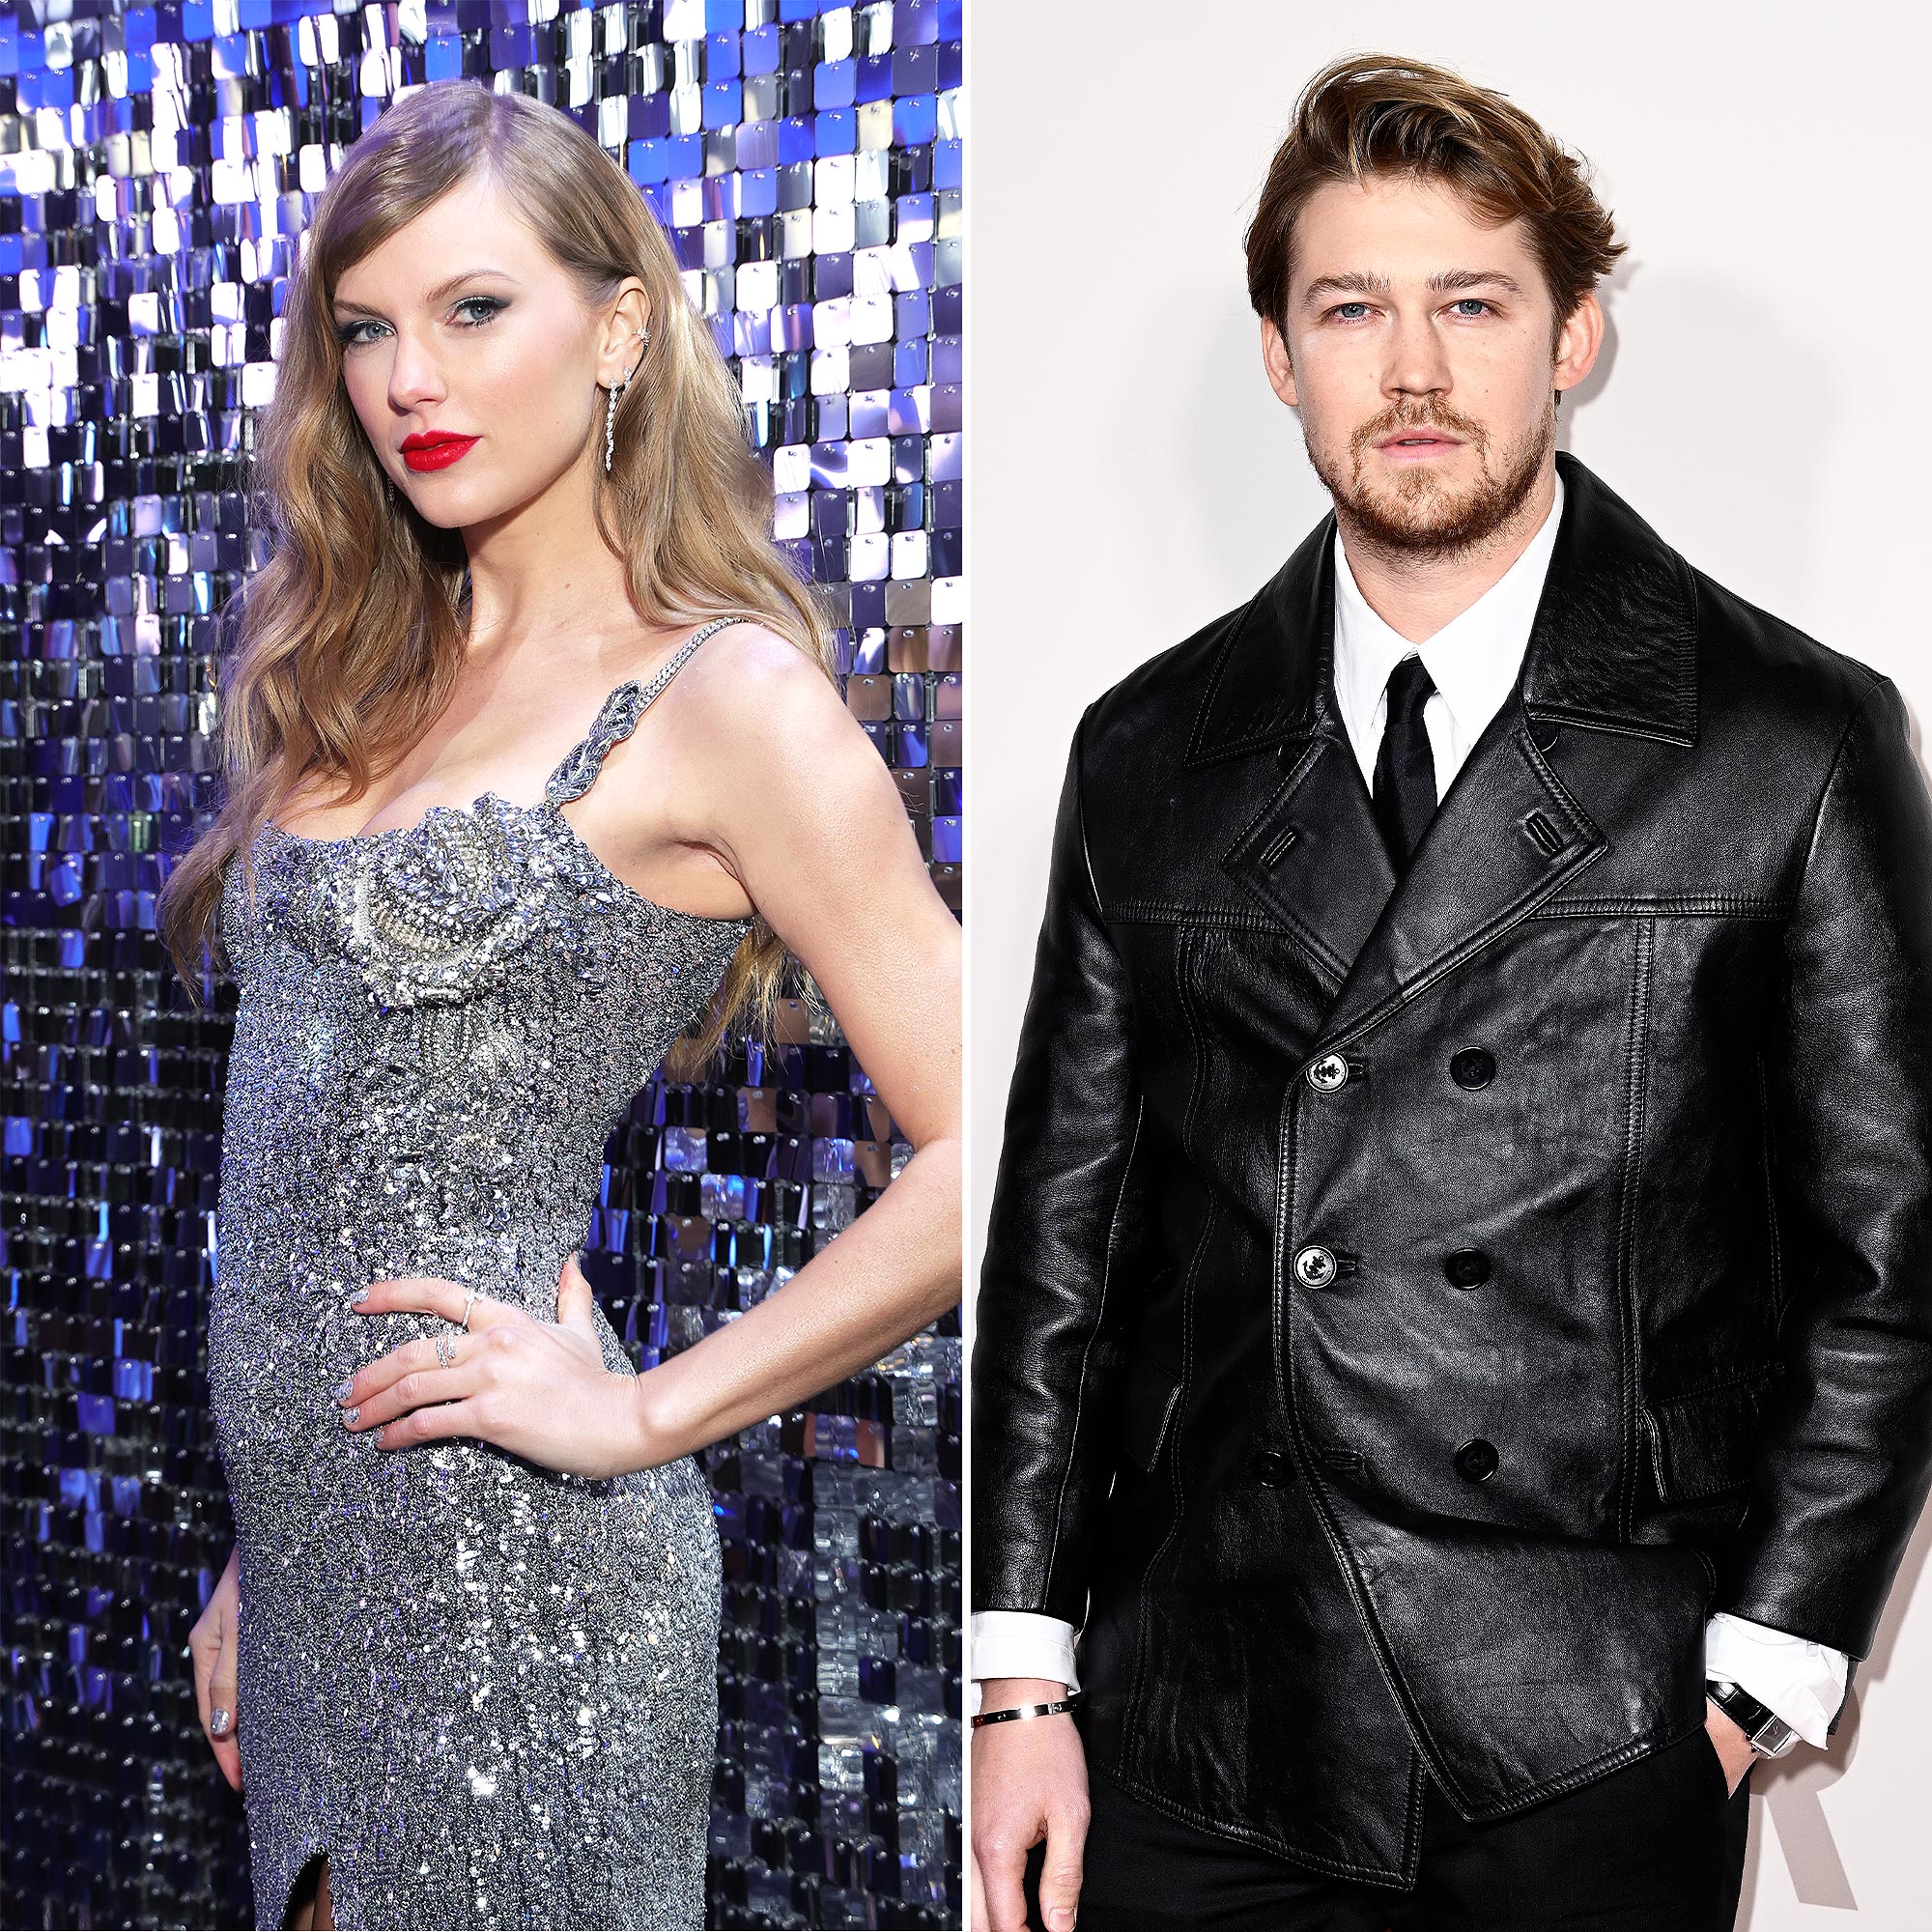 Ex of Joe Alwyn's Brother Counting Days Until Taylor Swift's 'TTPD'